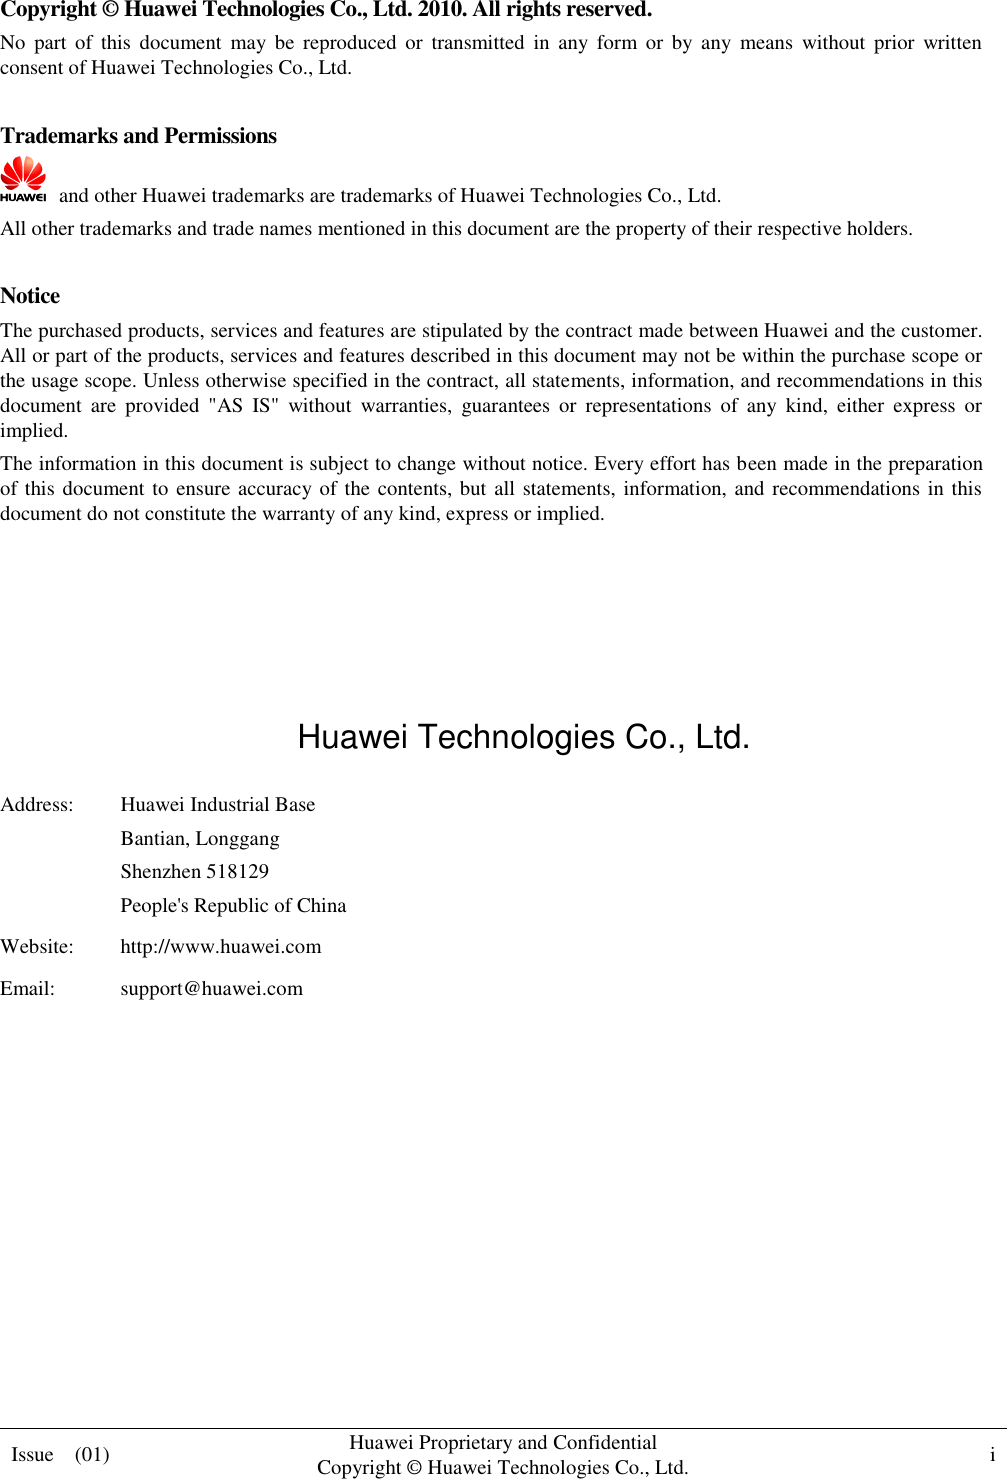  Issue    (01) Huawei Proprietary and Confidential                                     Copyright © Huawei Technologies Co., Ltd. i    Copyright © Huawei Technologies Co., Ltd. 2010. All rights reserved. No  part  of  this  document  may  be  reproduced  or  transmitted  in  any  form  or  by  any  means  without  prior  written consent of Huawei Technologies Co., Ltd.  Trademarks and Permissions   and other Huawei trademarks are trademarks of Huawei Technologies Co., Ltd. All other trademarks and trade names mentioned in this document are the property of their respective holders.  Notice The purchased products, services and features are stipulated by the contract made between Huawei and the customer. All or part of the products, services and features described in this document may not be within the purchase scope or the usage scope. Unless otherwise specified in the contract, all statements, information, and recommendations in this document  are  provided  &quot;AS  IS&quot;  without  warranties,  guarantees  or  representations  of  any  kind,  either  express  or implied. The information in this document is subject to change without notice. Every effort has been made in the preparation of this document to ensure accuracy of the contents, but  all statements, information, and recommendations in this document do not constitute the warranty of any kind, express or implied.     Huawei Technologies Co., Ltd. Address: Huawei Industrial Base Bantian, Longgang Shenzhen 518129 People&apos;s Republic of China Website: http://www.huawei.com Email: support@huawei.com          